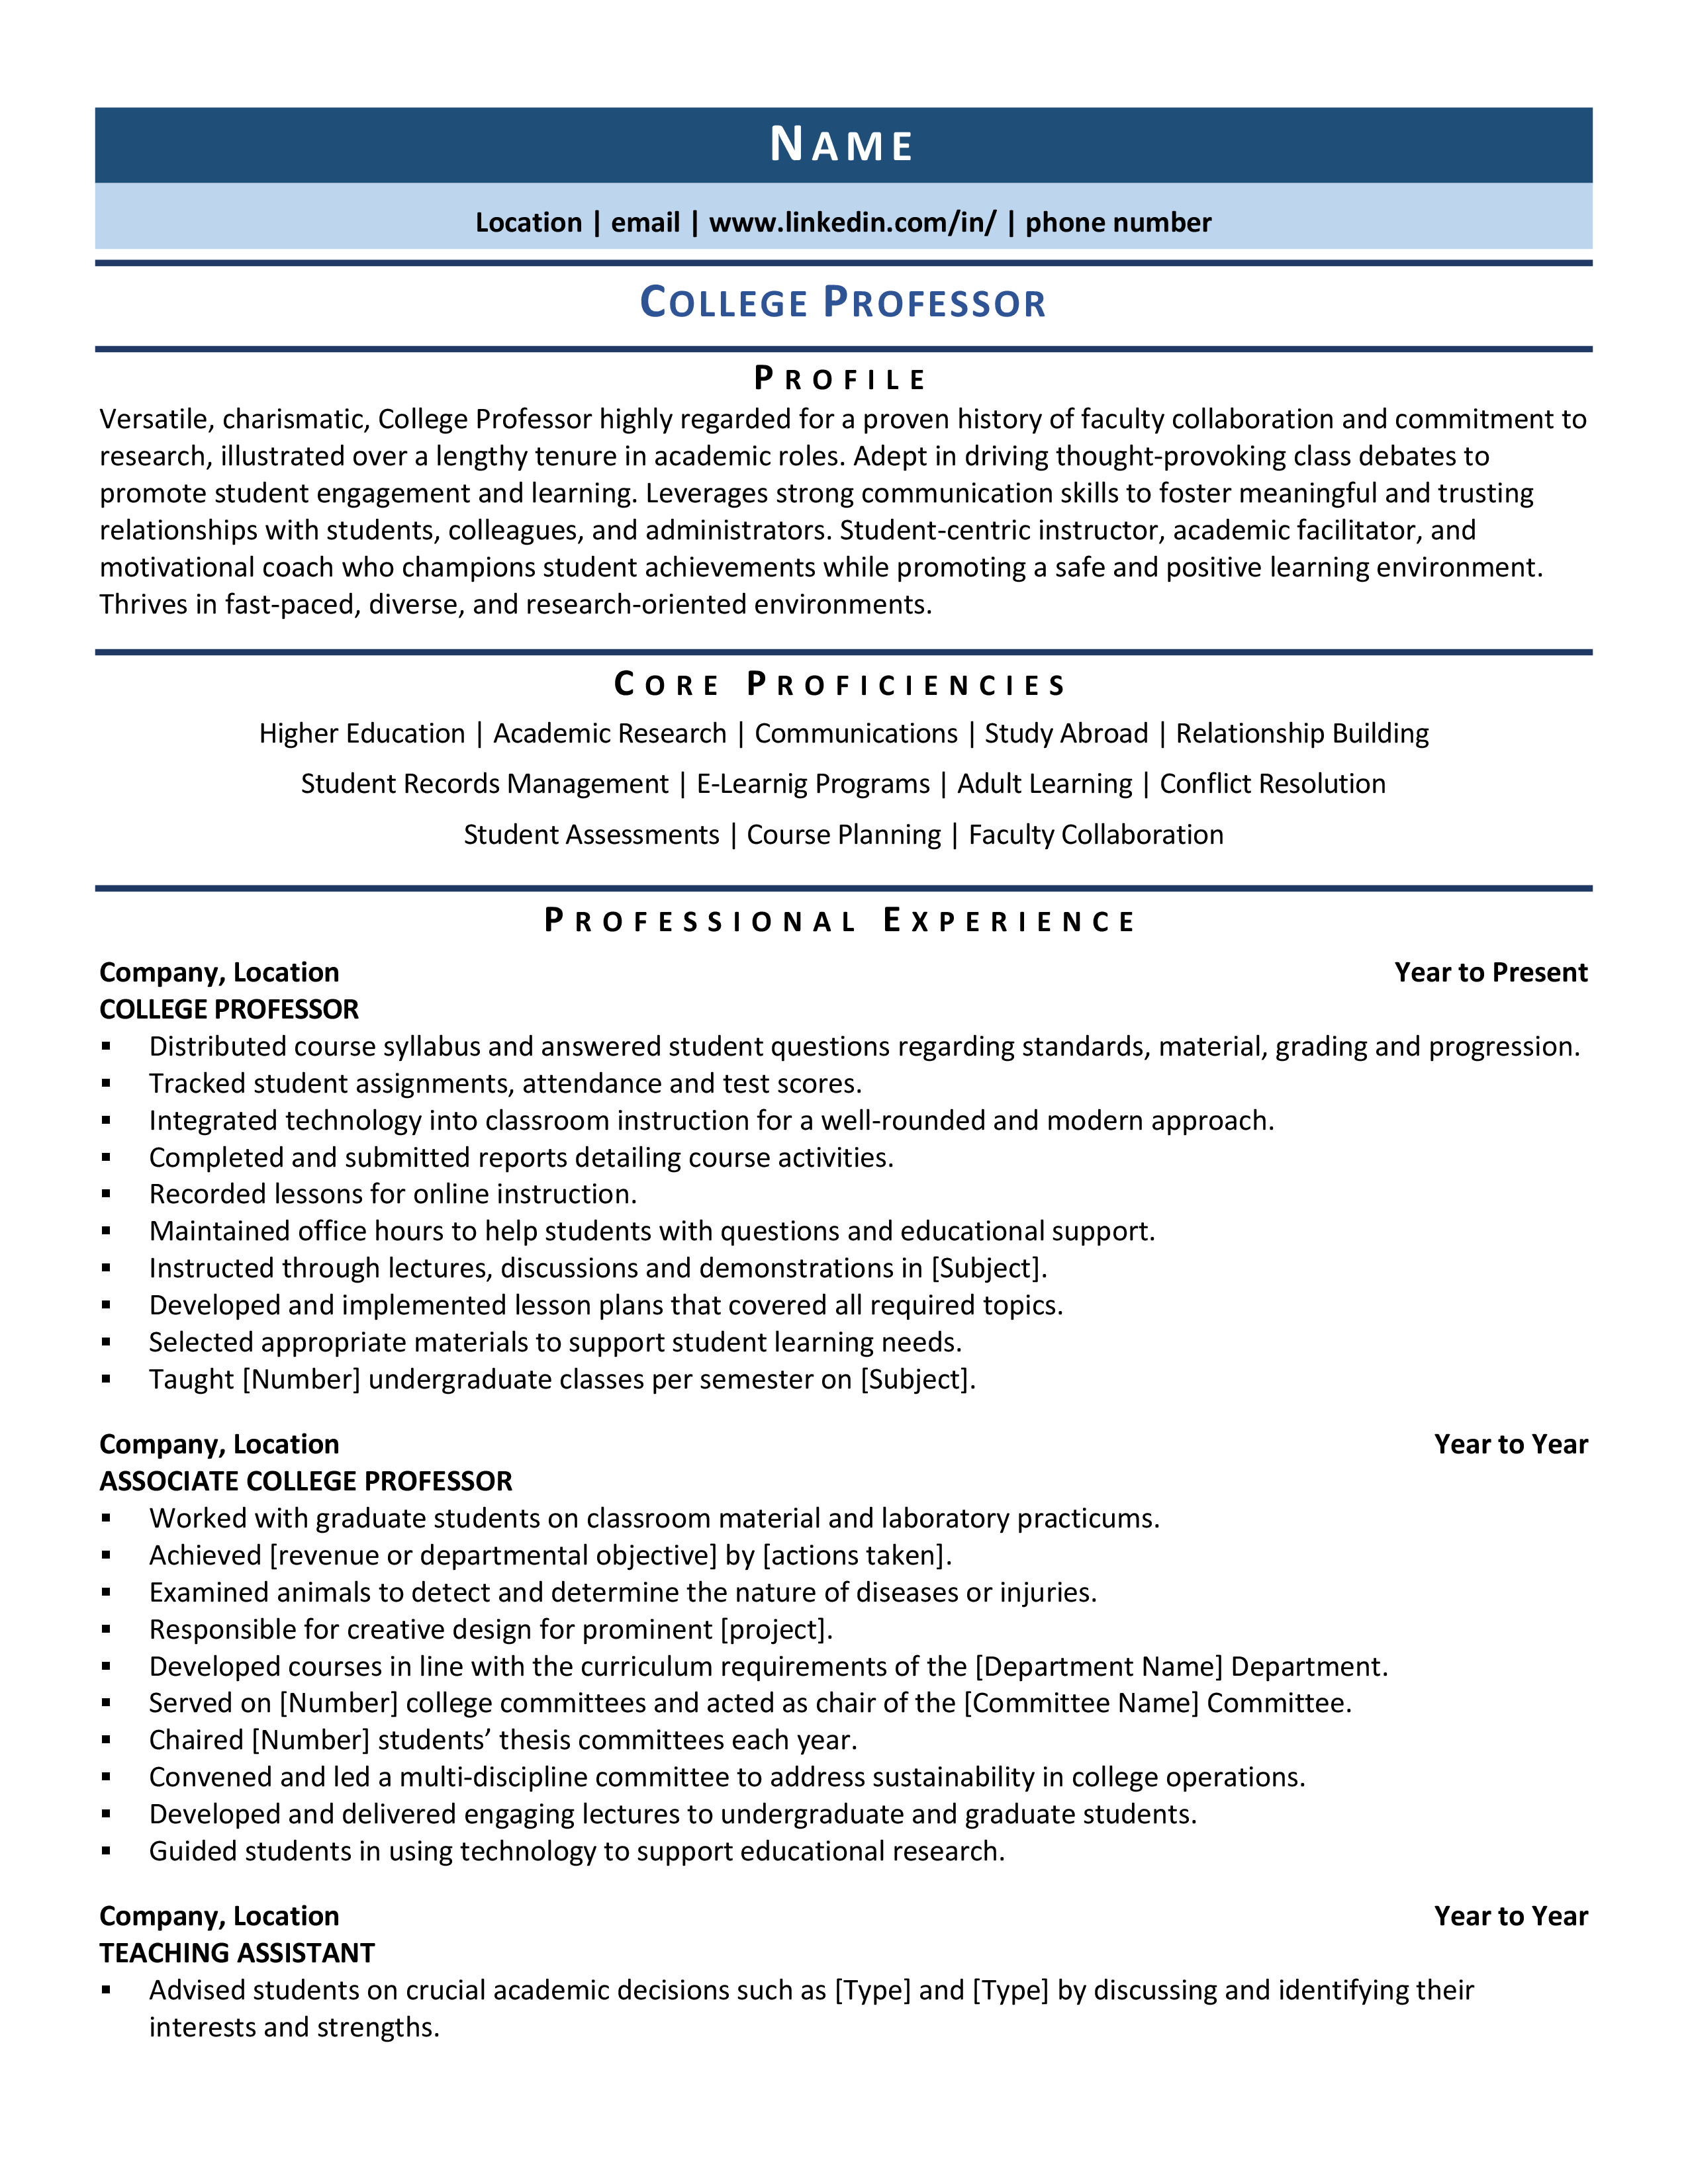 college resume template college essay guy